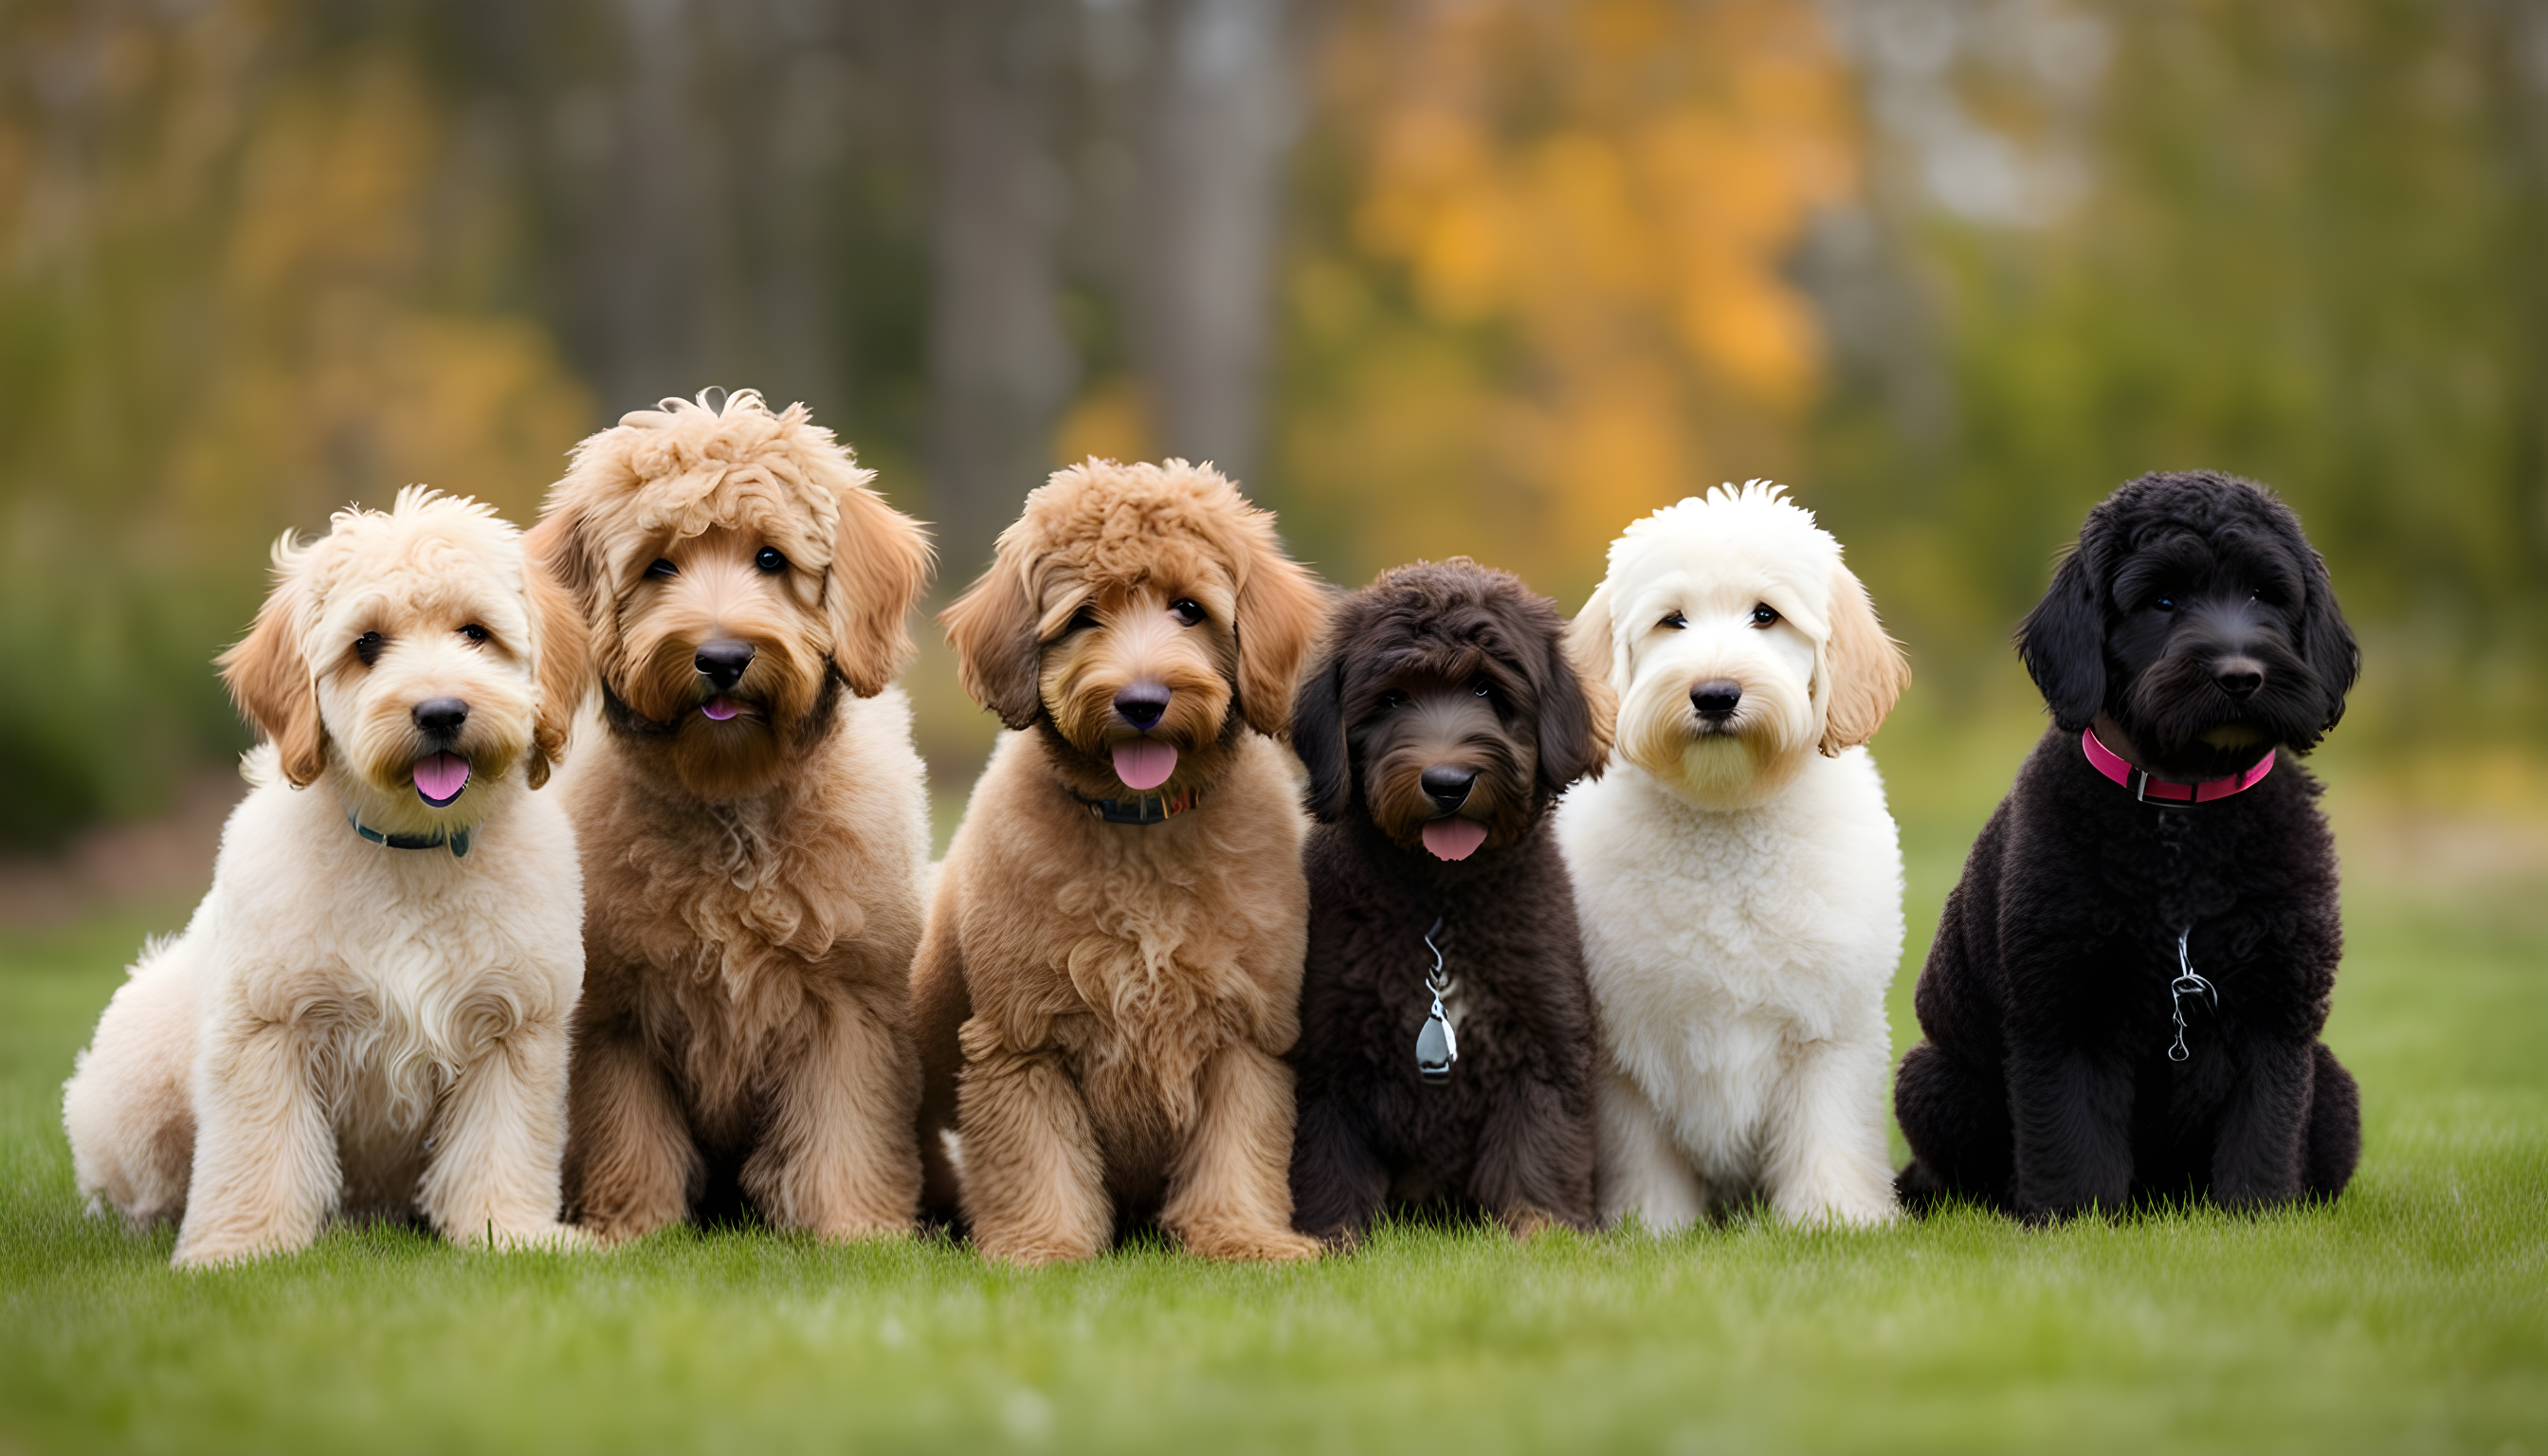 A lineup of Mini, Medium, and Standard Labradoodles with size labels.